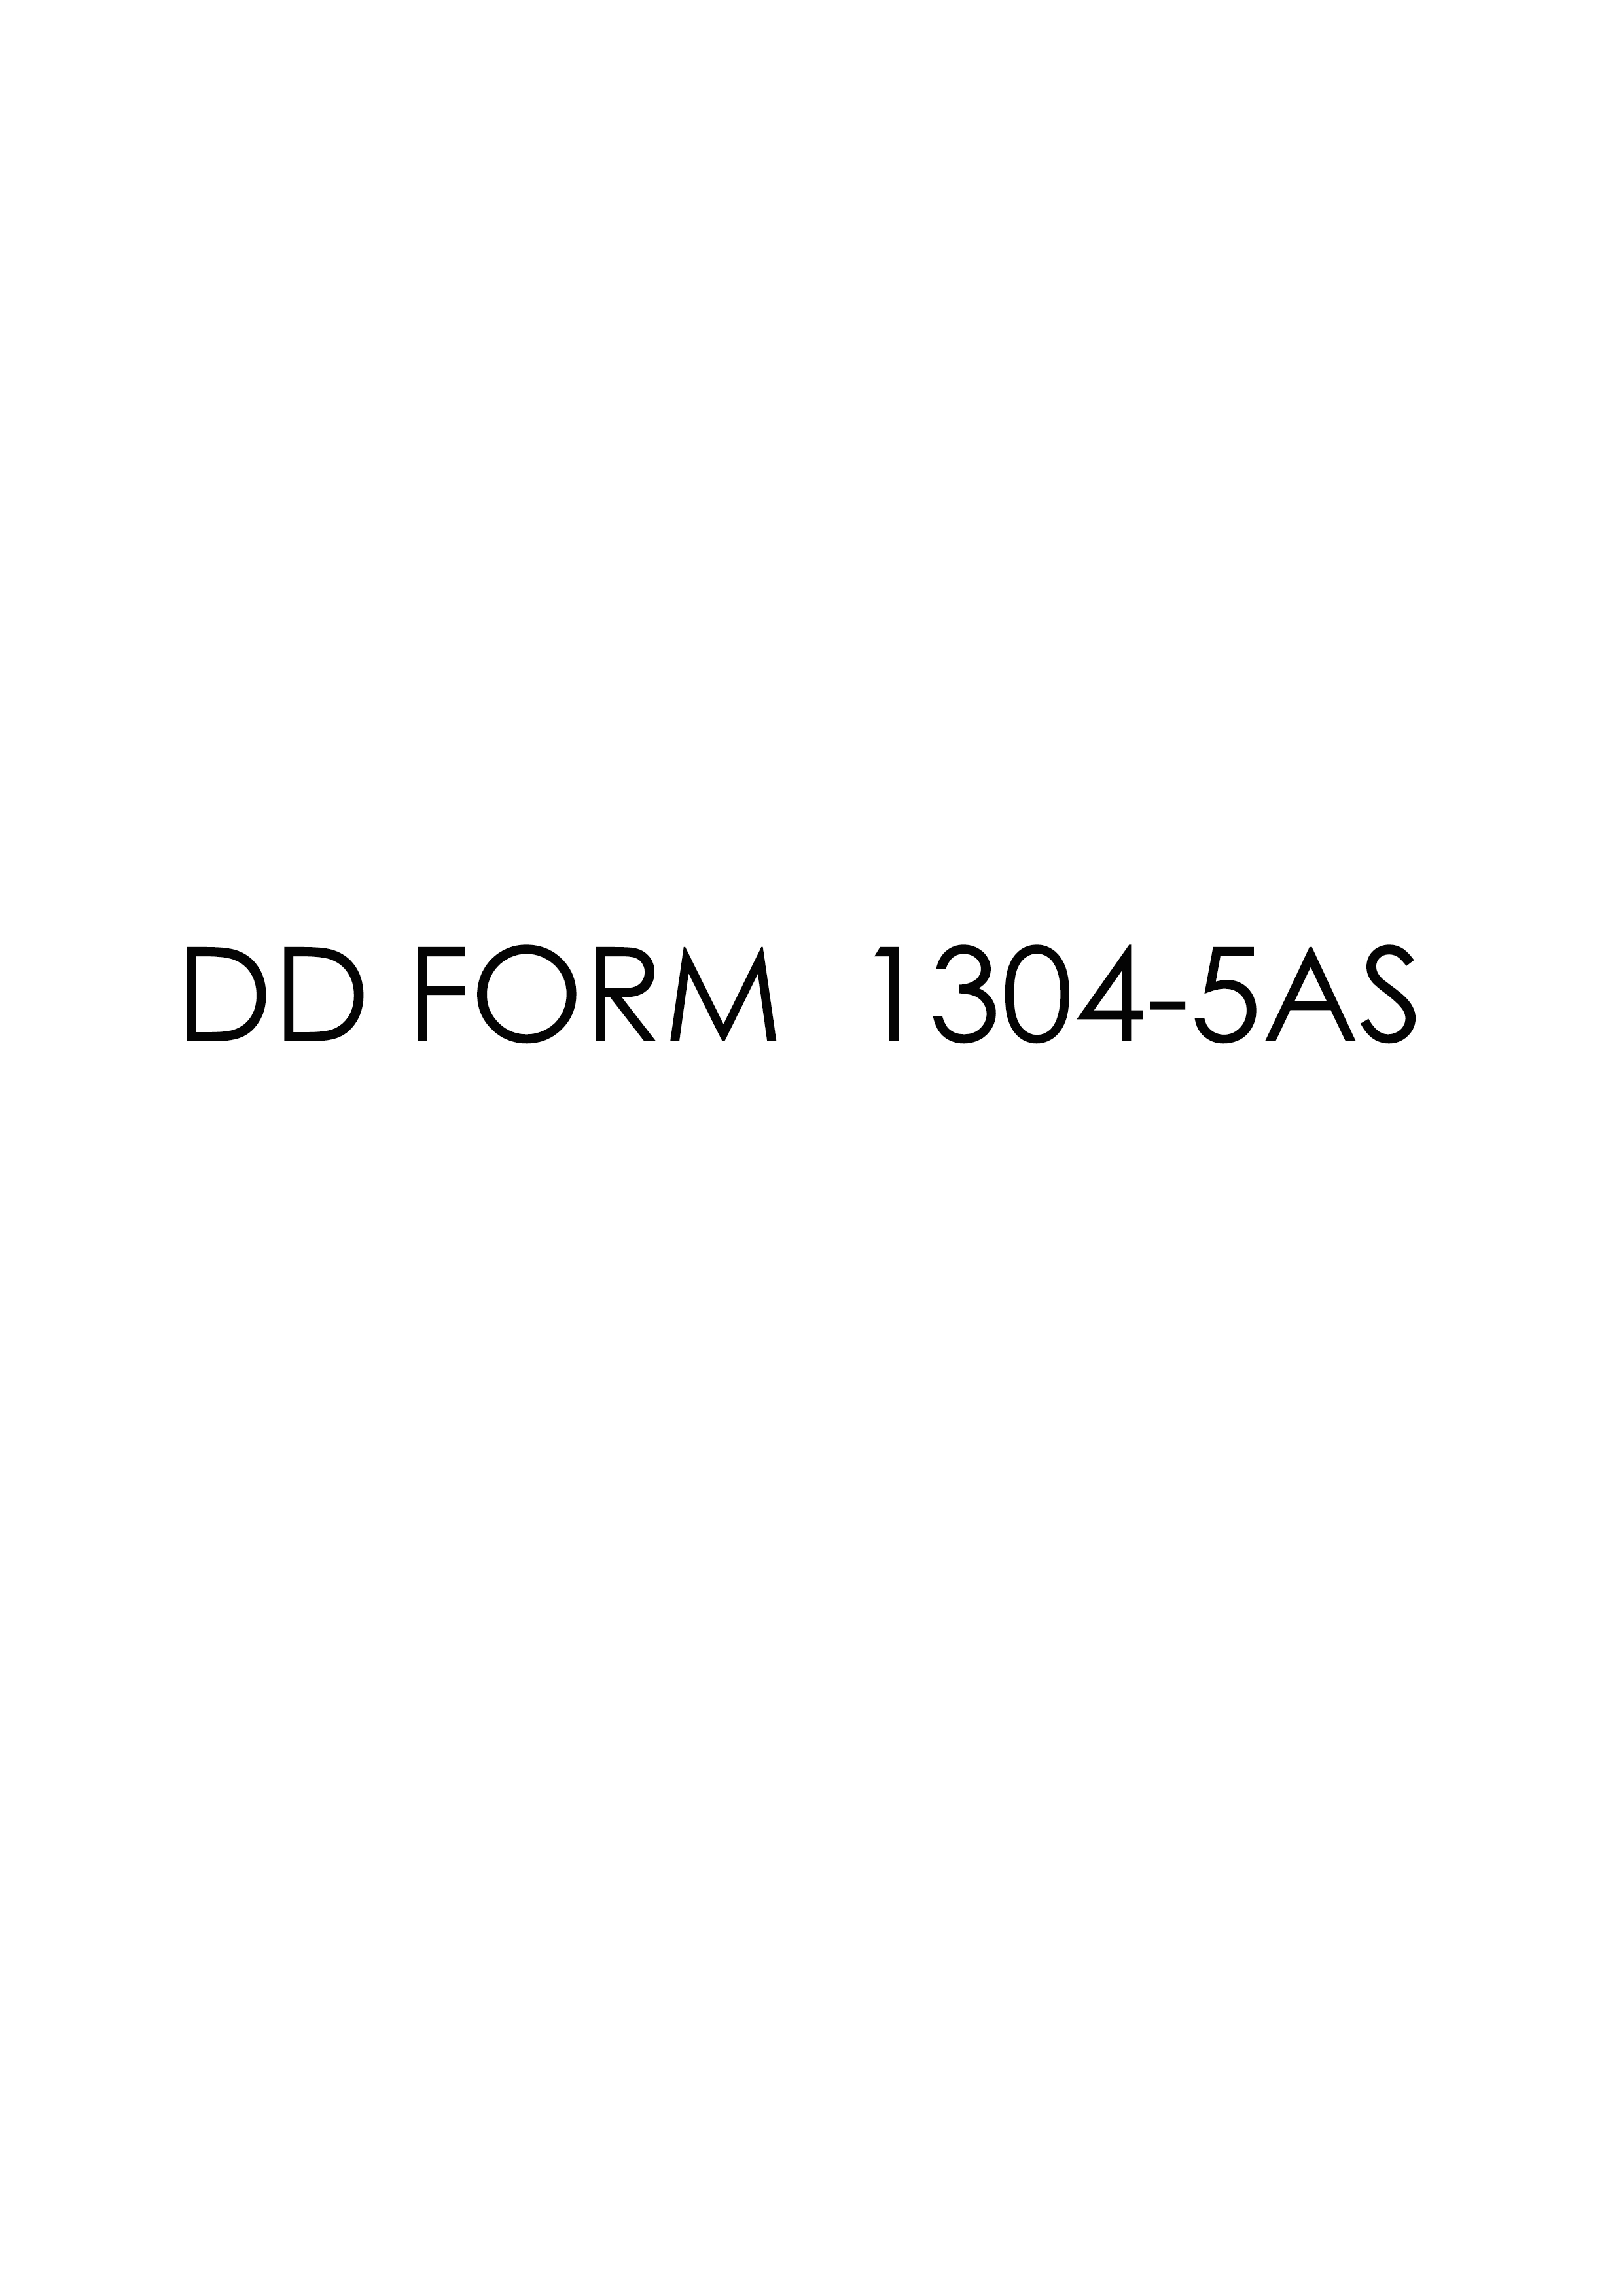 Download dd 1304-5AS